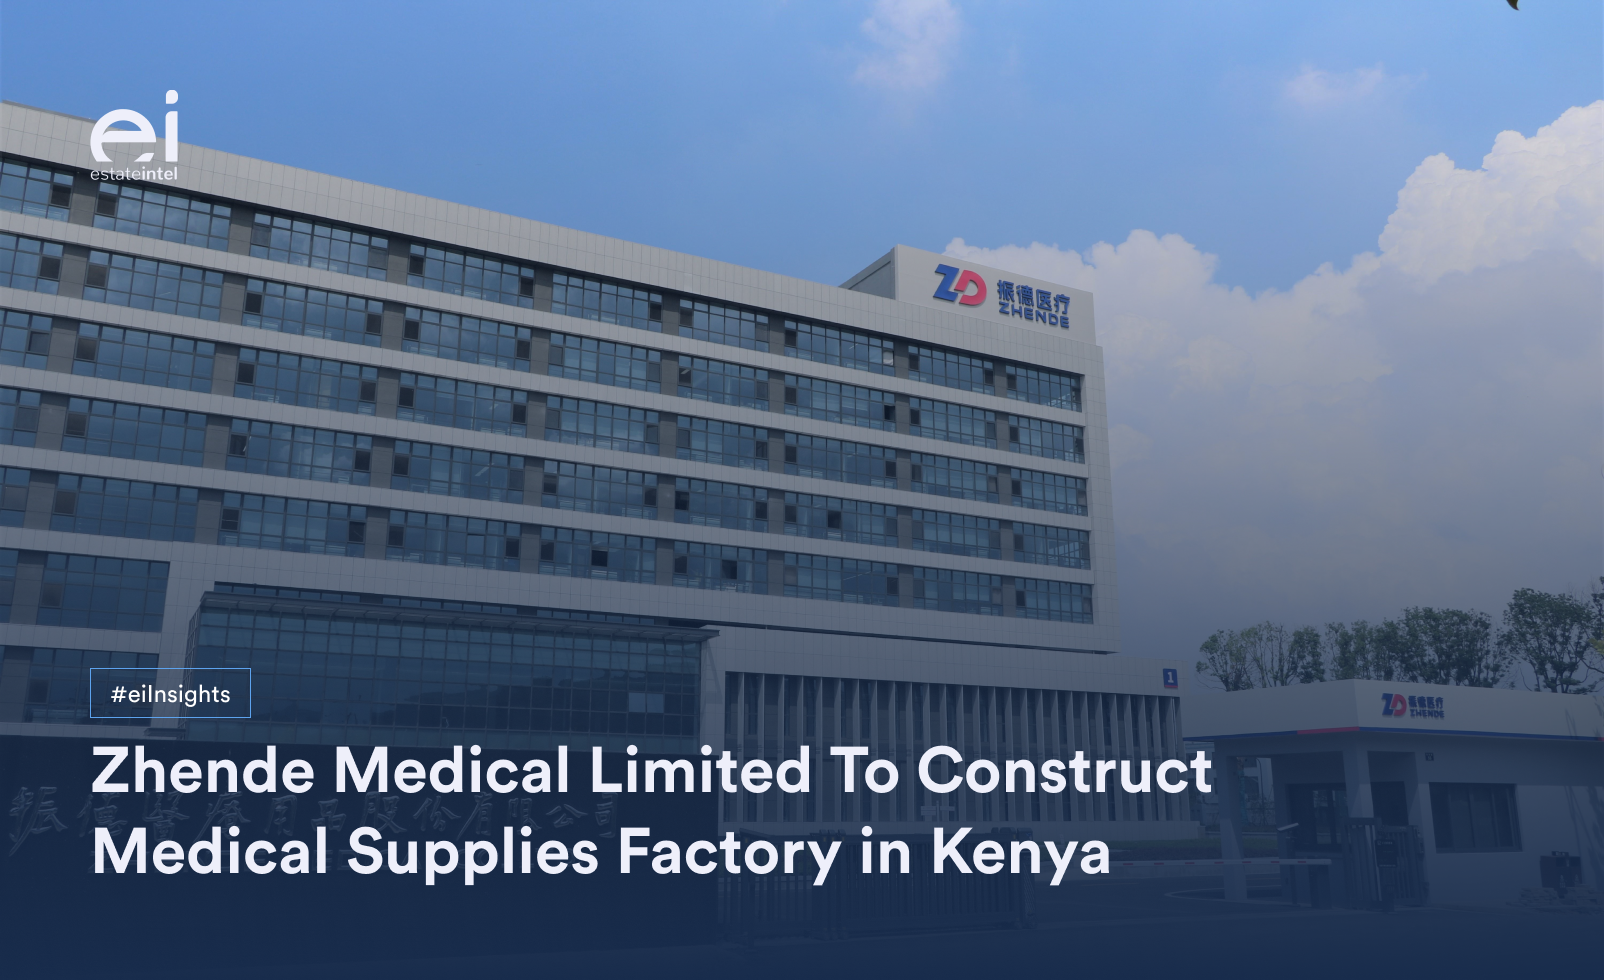 Kenya’s Health Care and Pharmaceuticals Expansion Offering New Revenue Channels To Property Developers and Managers